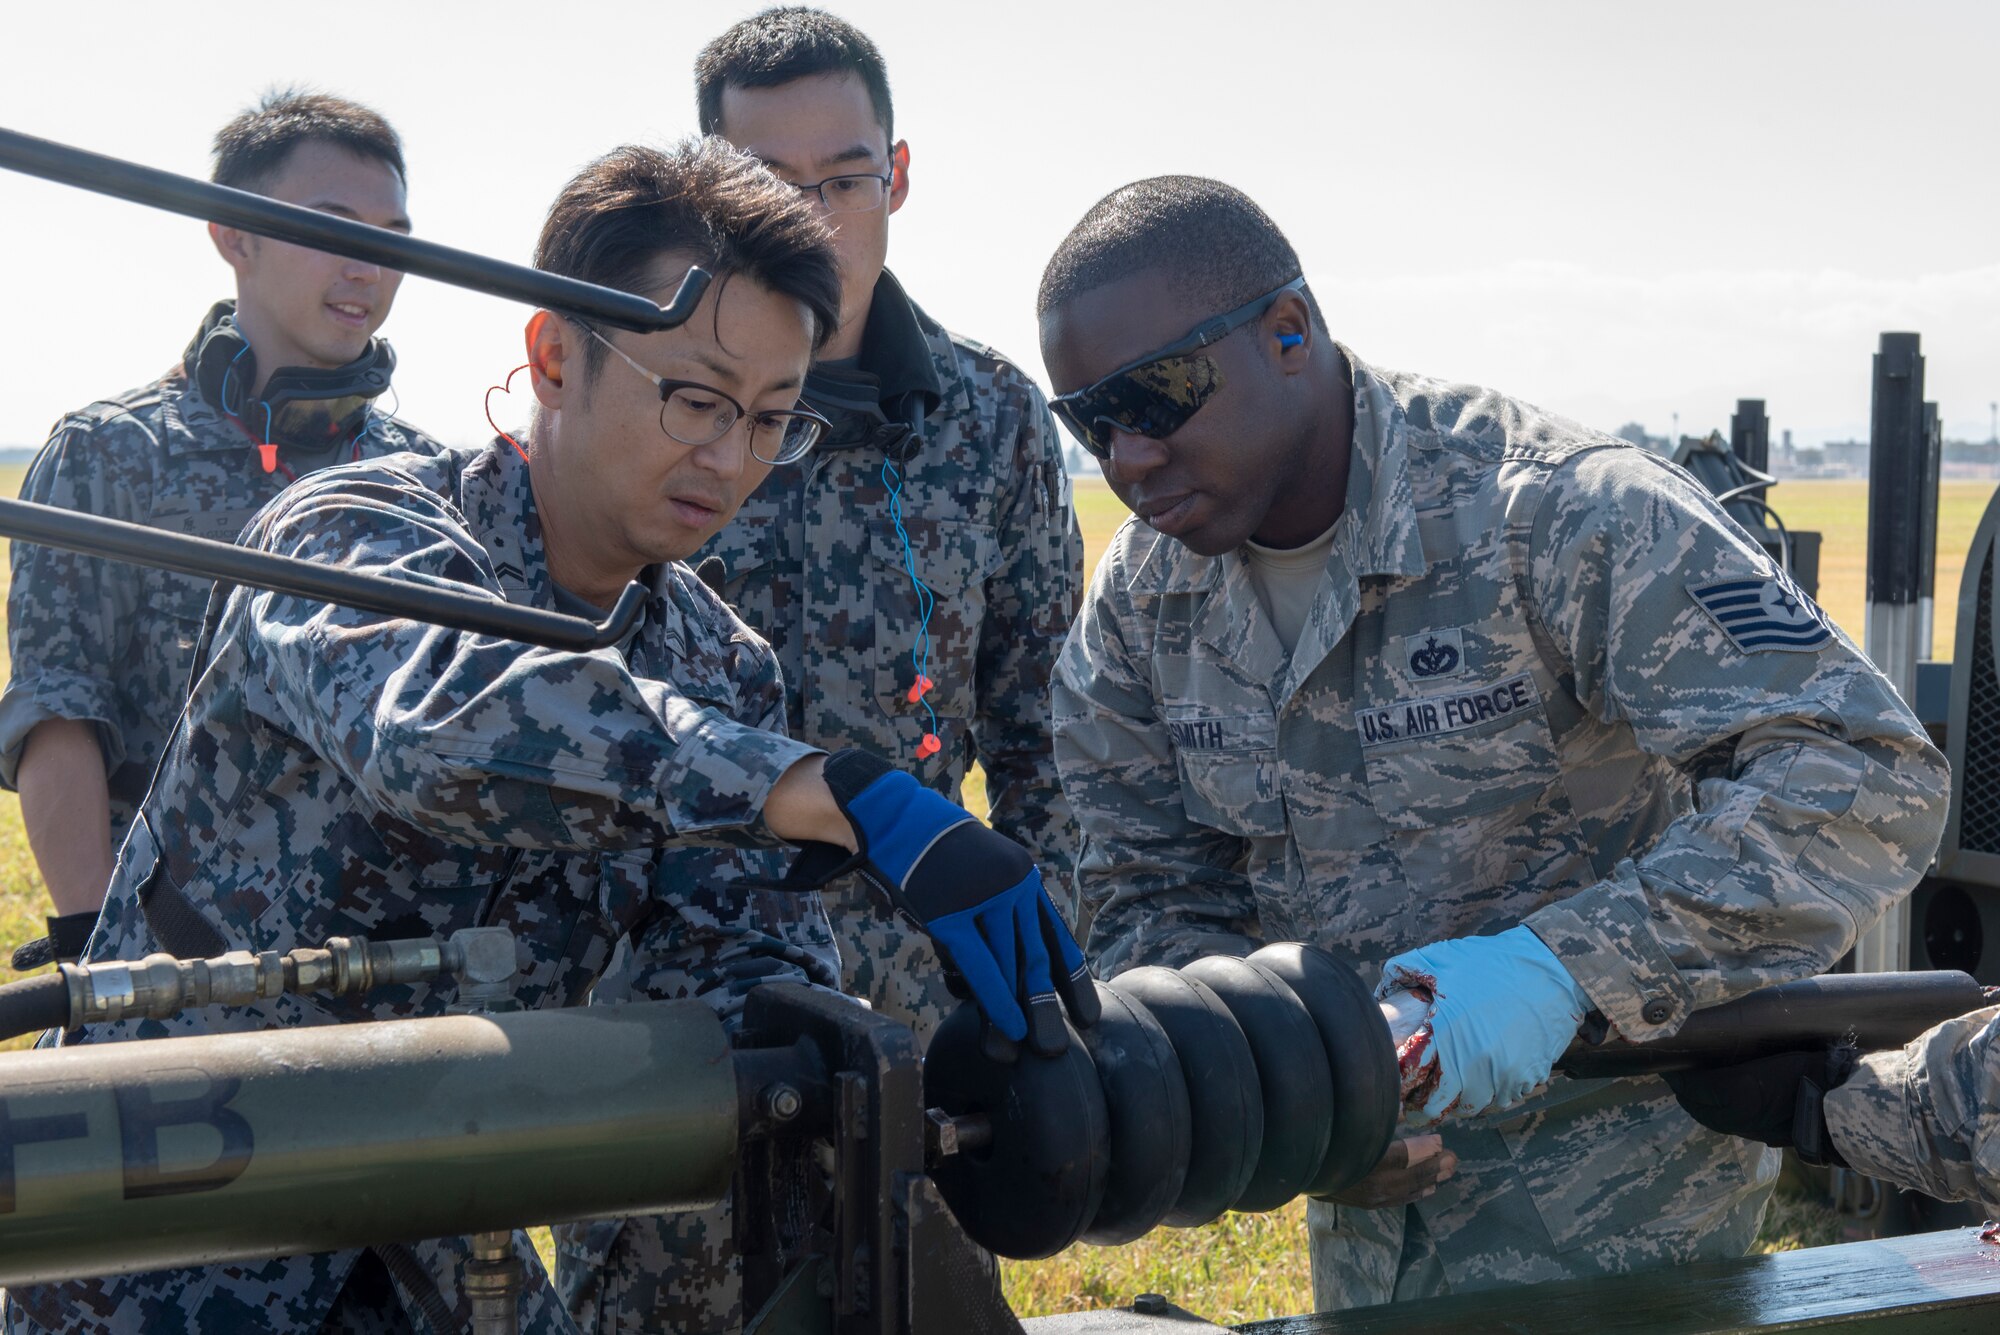 U.S. Air Force Tech. Sgt. Romain Smith, 374th Civil Engineer Squadron electrical power production, works with members of the Koku Jietai (Japan Air Self-Defense Force) members to install donuts onto the cable of a Mobile Aircraft Arresting System (MAAS) at a bilateral training event at Yokota Air Base, Japan, Oct. 25, 2018.